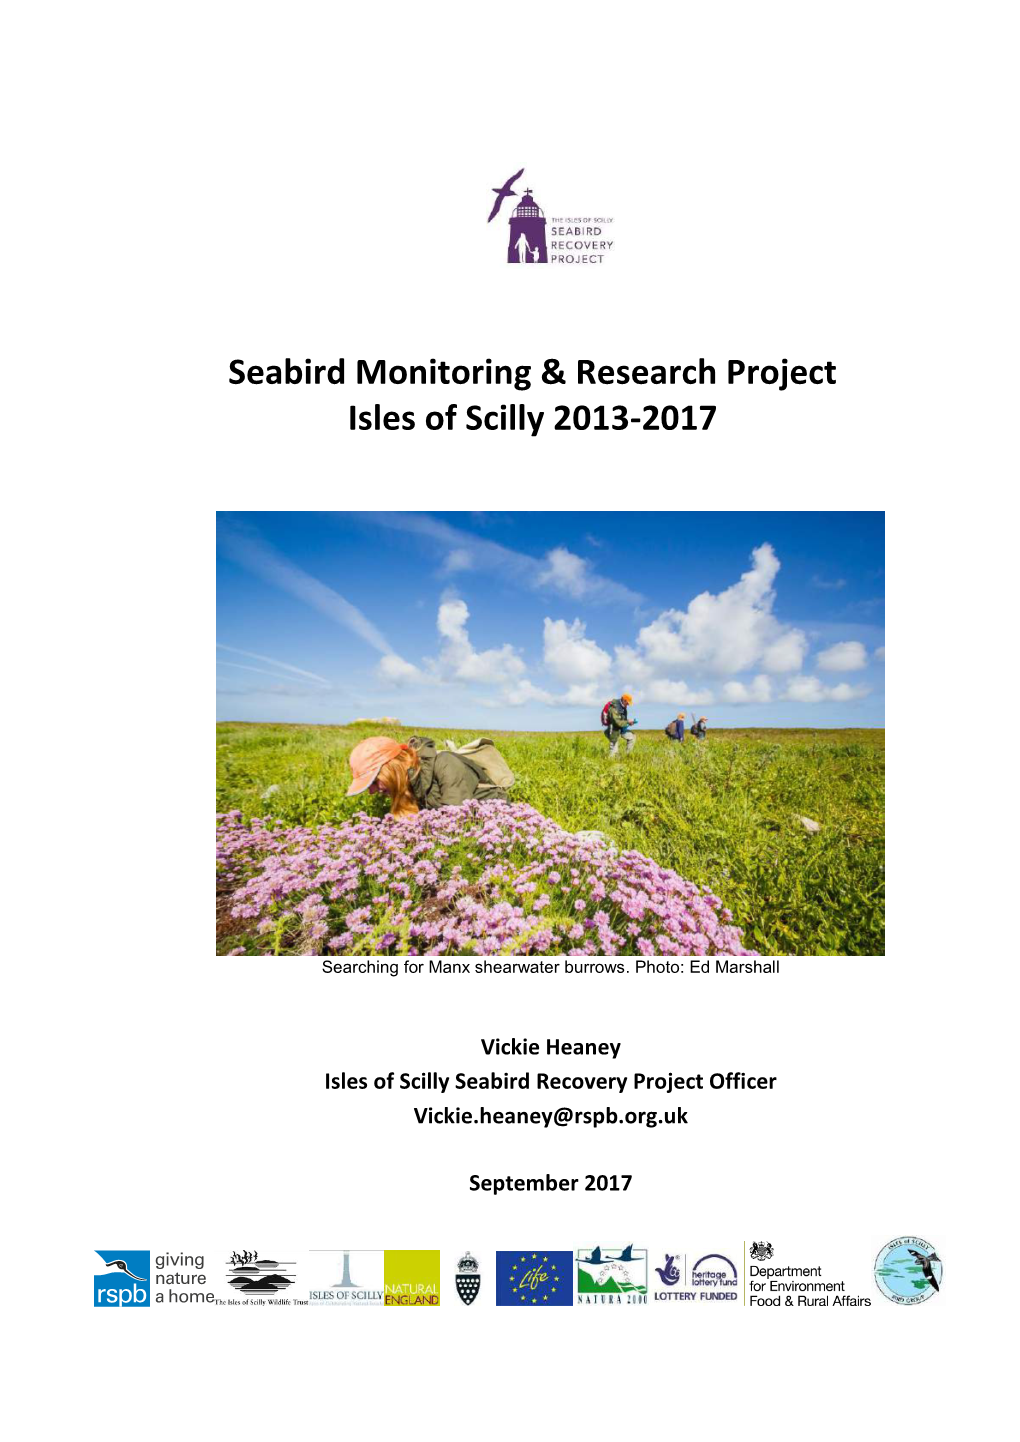 Seabird Monitoring & Research Project Isles of Scilly 2013-2017